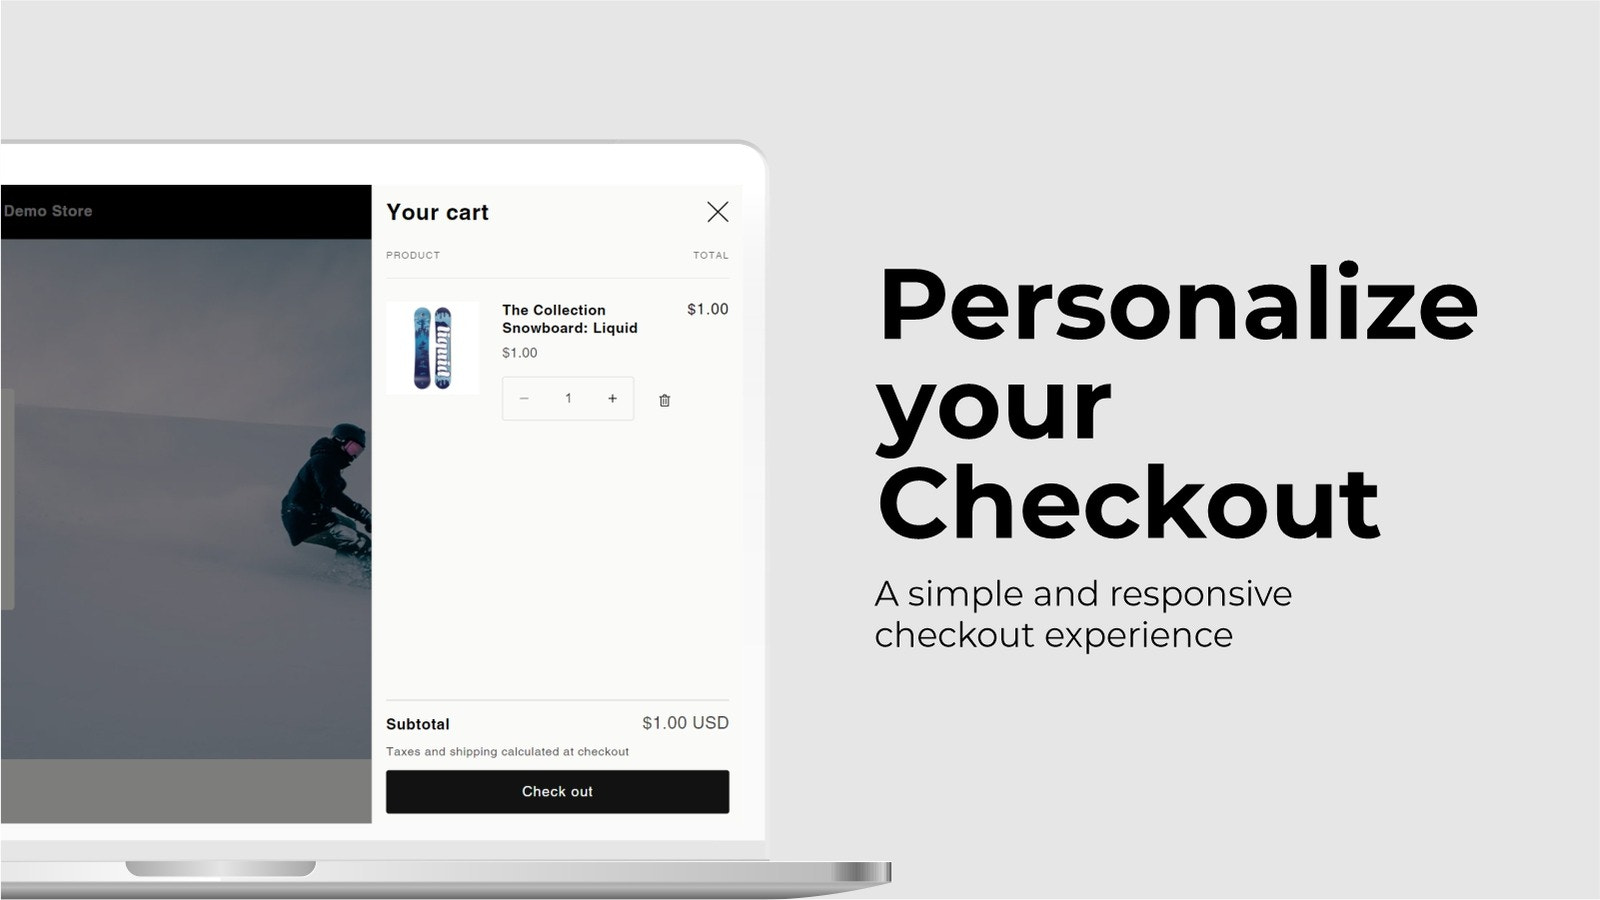 Personalize your checkout.